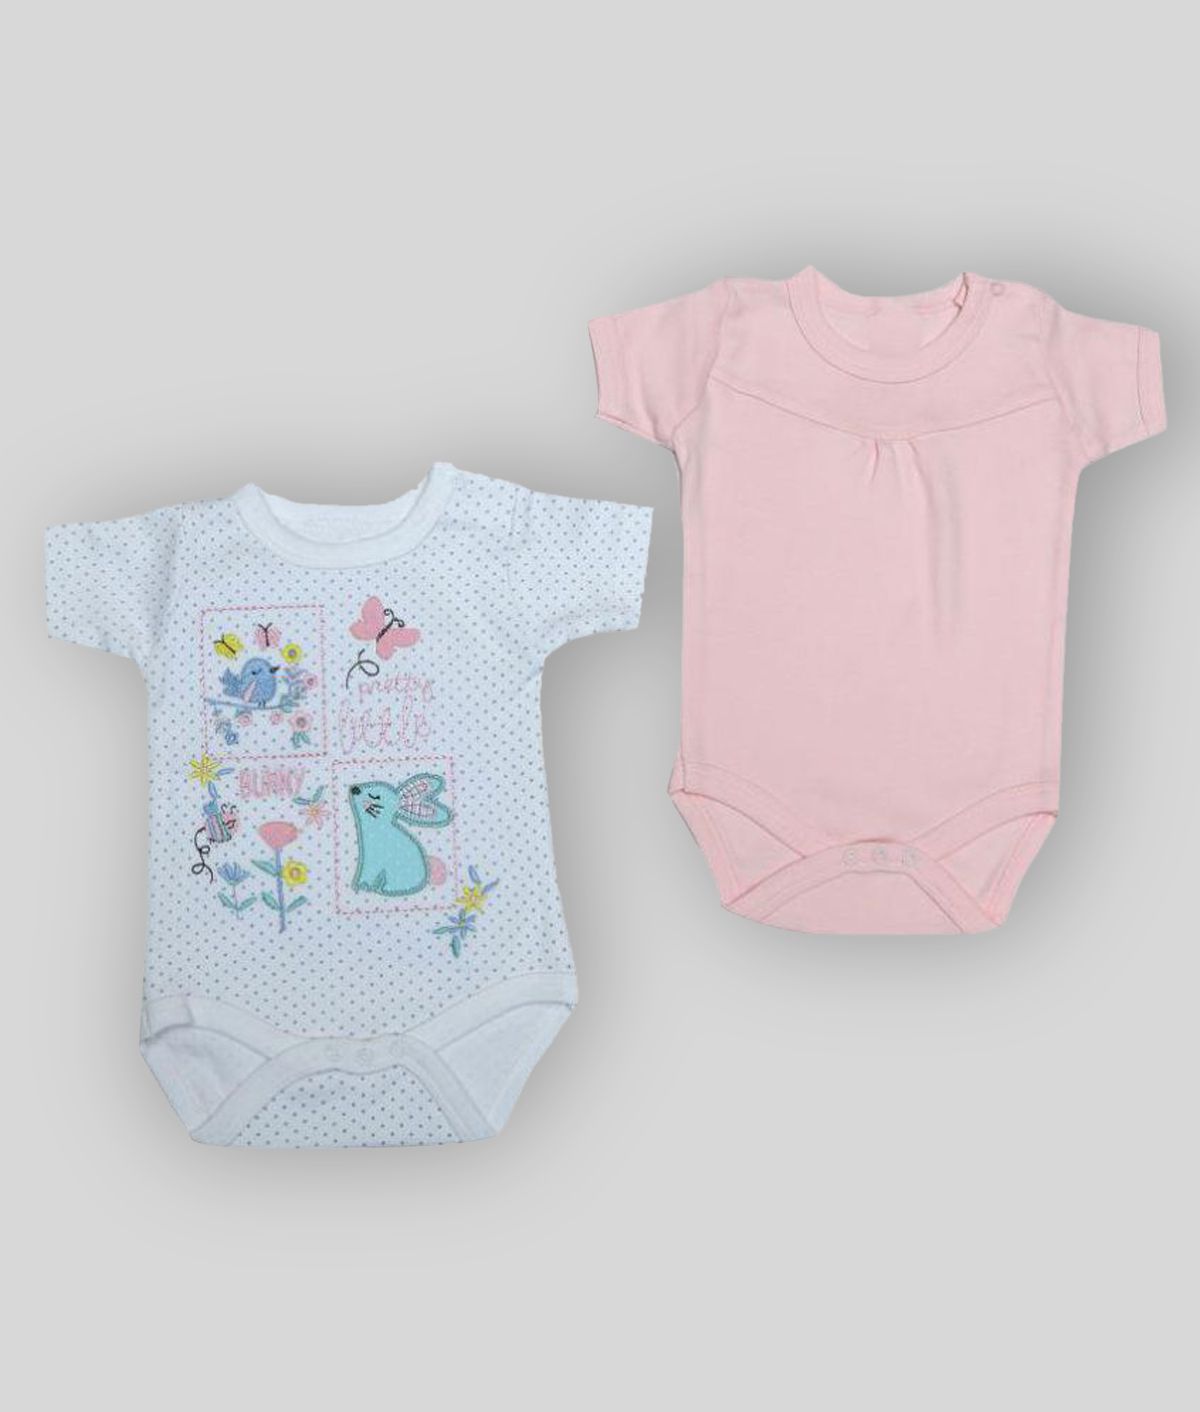     			KABOOS - Pink Cotton Rompers For Baby Boy ( Pack of 2 )